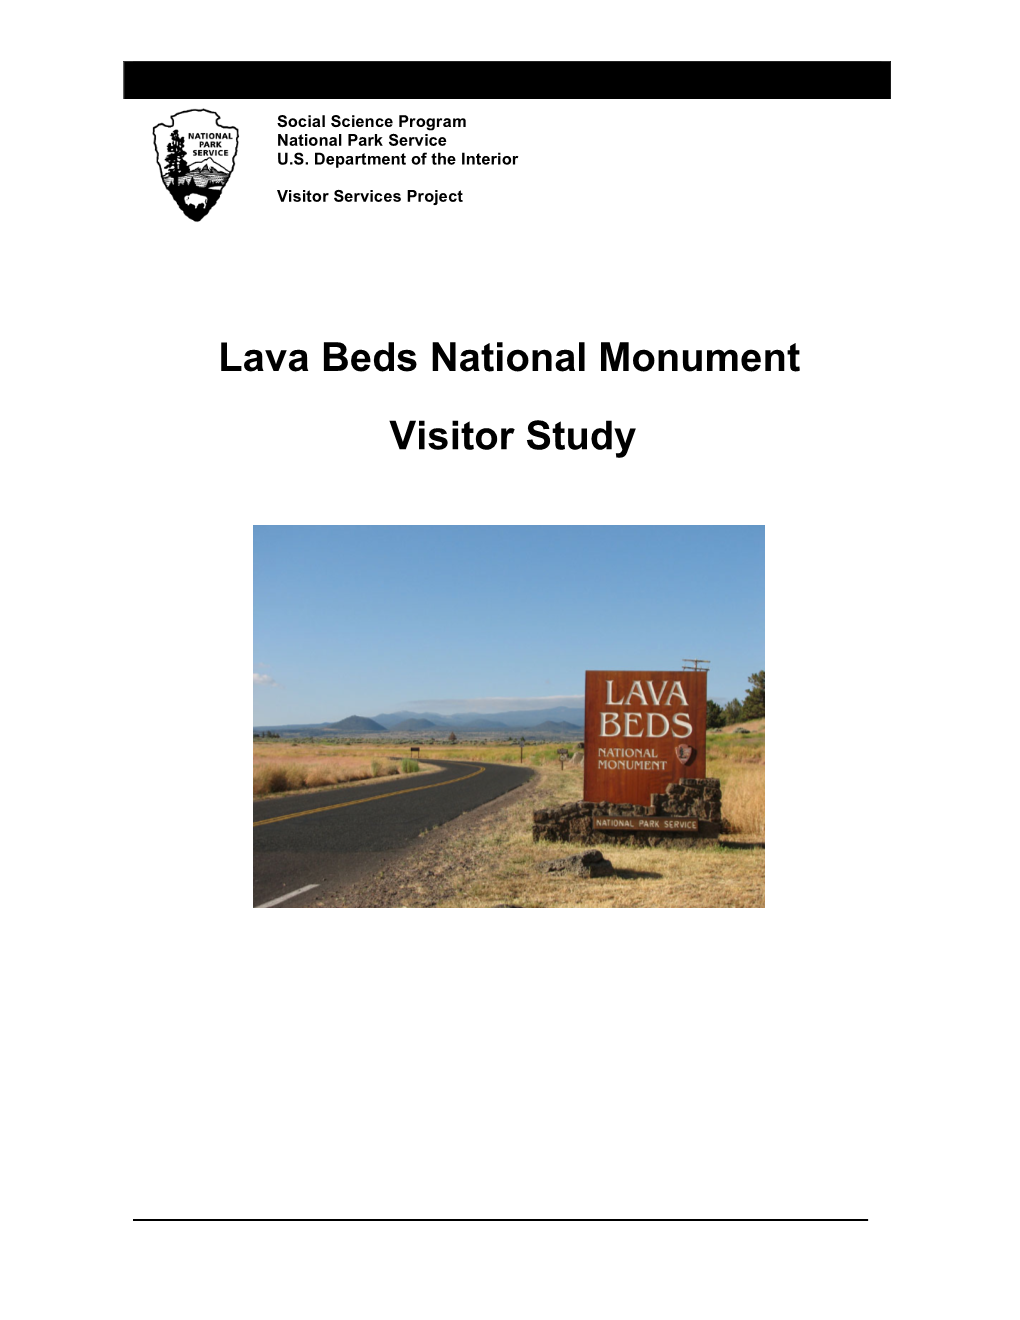 Lava Beds National Monument Visitor Study OMB Approval 1024- 0224(NPS# 07-027) Expiration Date: 12/31/2007